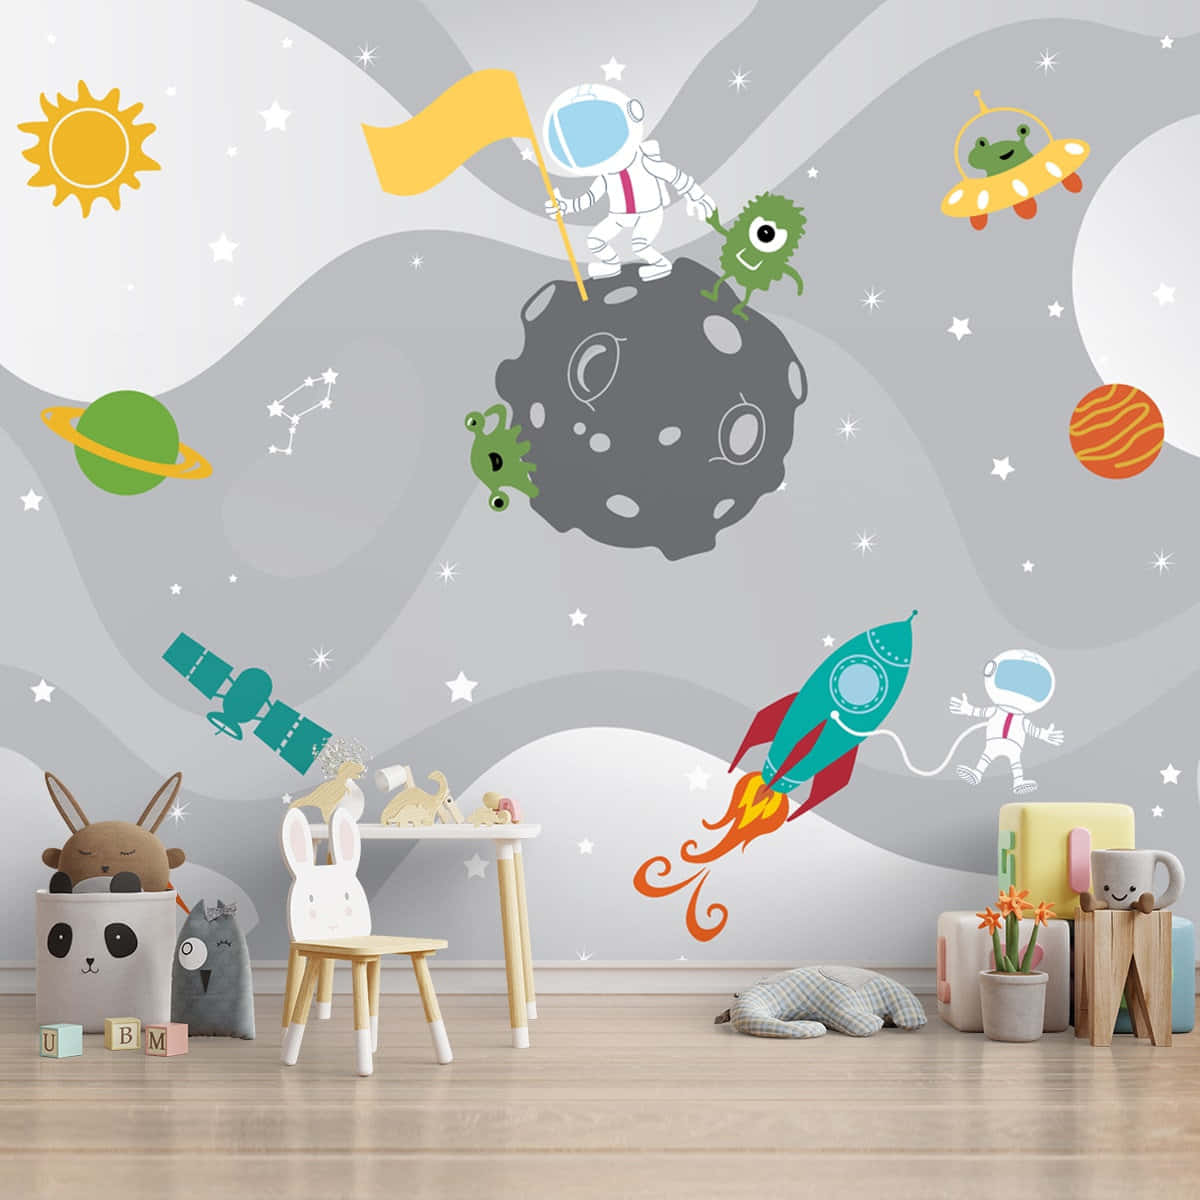 Travel Across Galaxies With This Ultra-cute Astronaut! Wallpaper